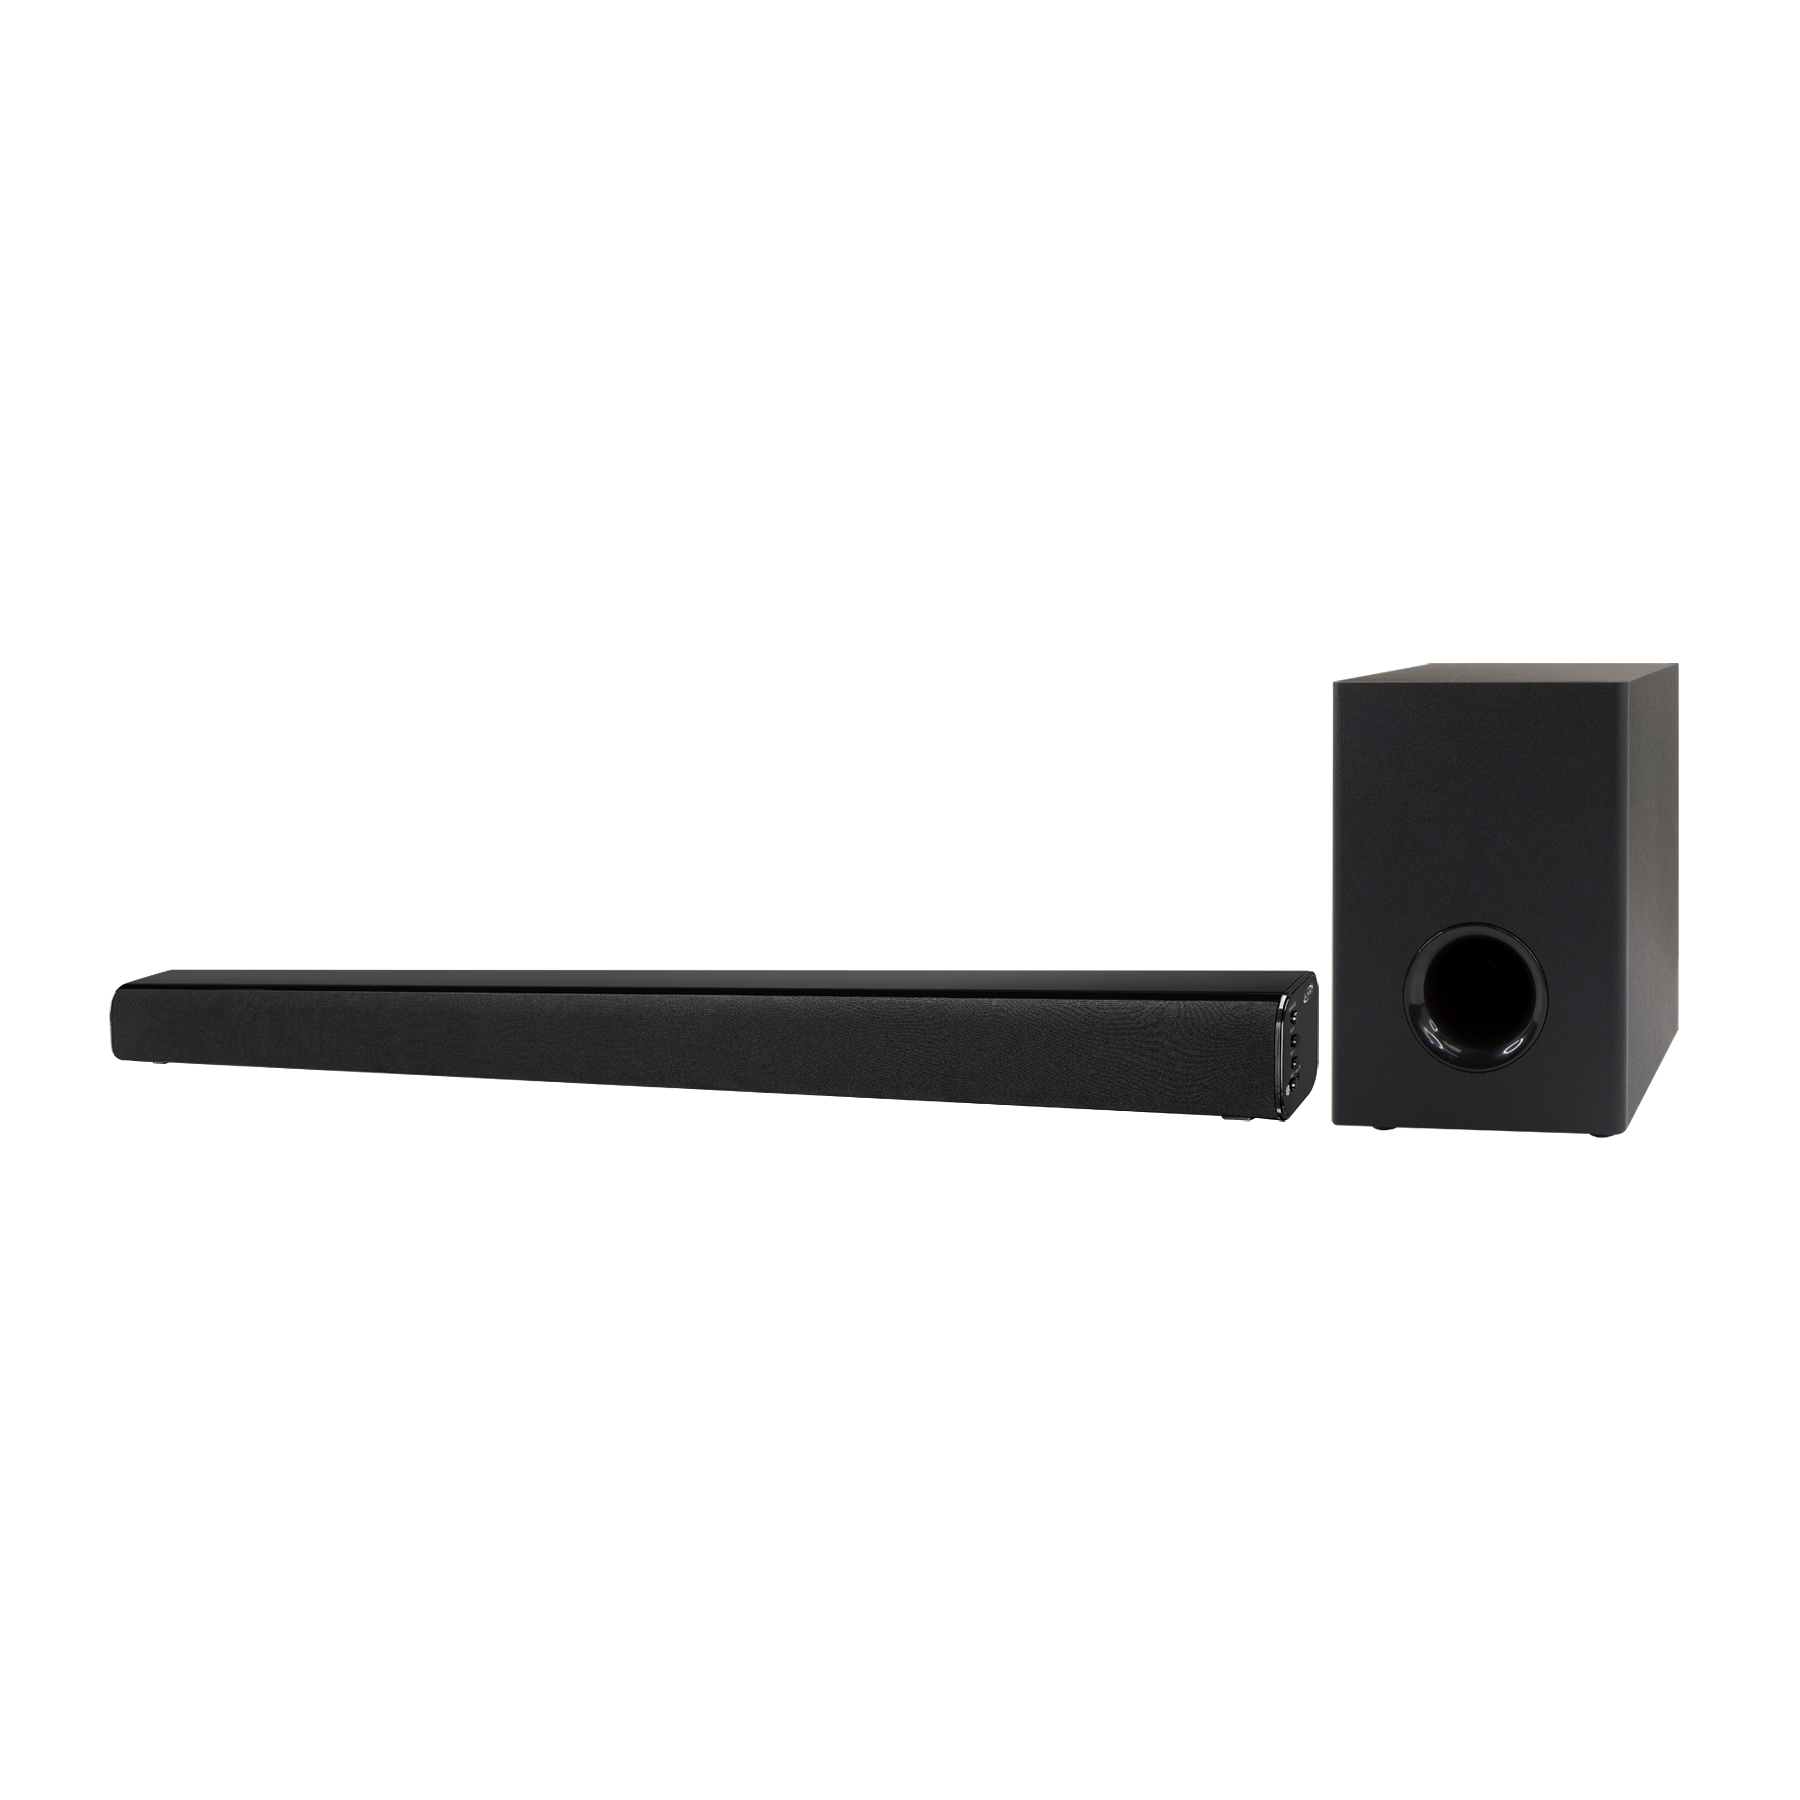 iLive 2.1 37" HD Soundbar and Wireless Subwoofer, ITBSW399B - image 1 of 6